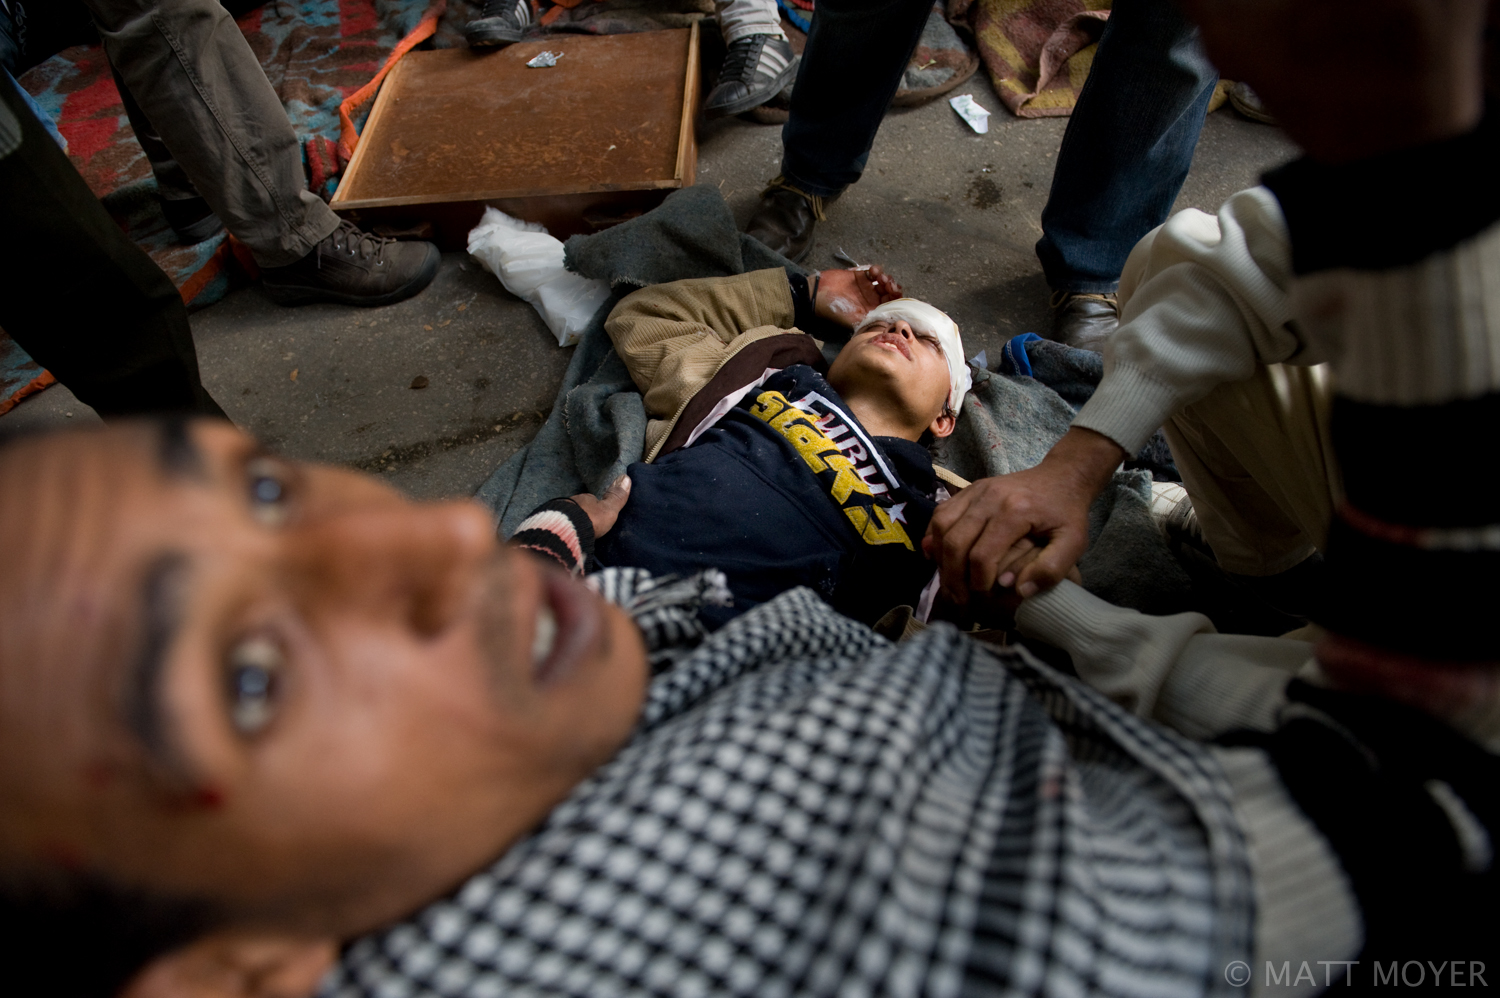  An Egyptian protester is assisted at a makeshift field hospital after being injured in clashes with government forces in Cairo, Egypt. 